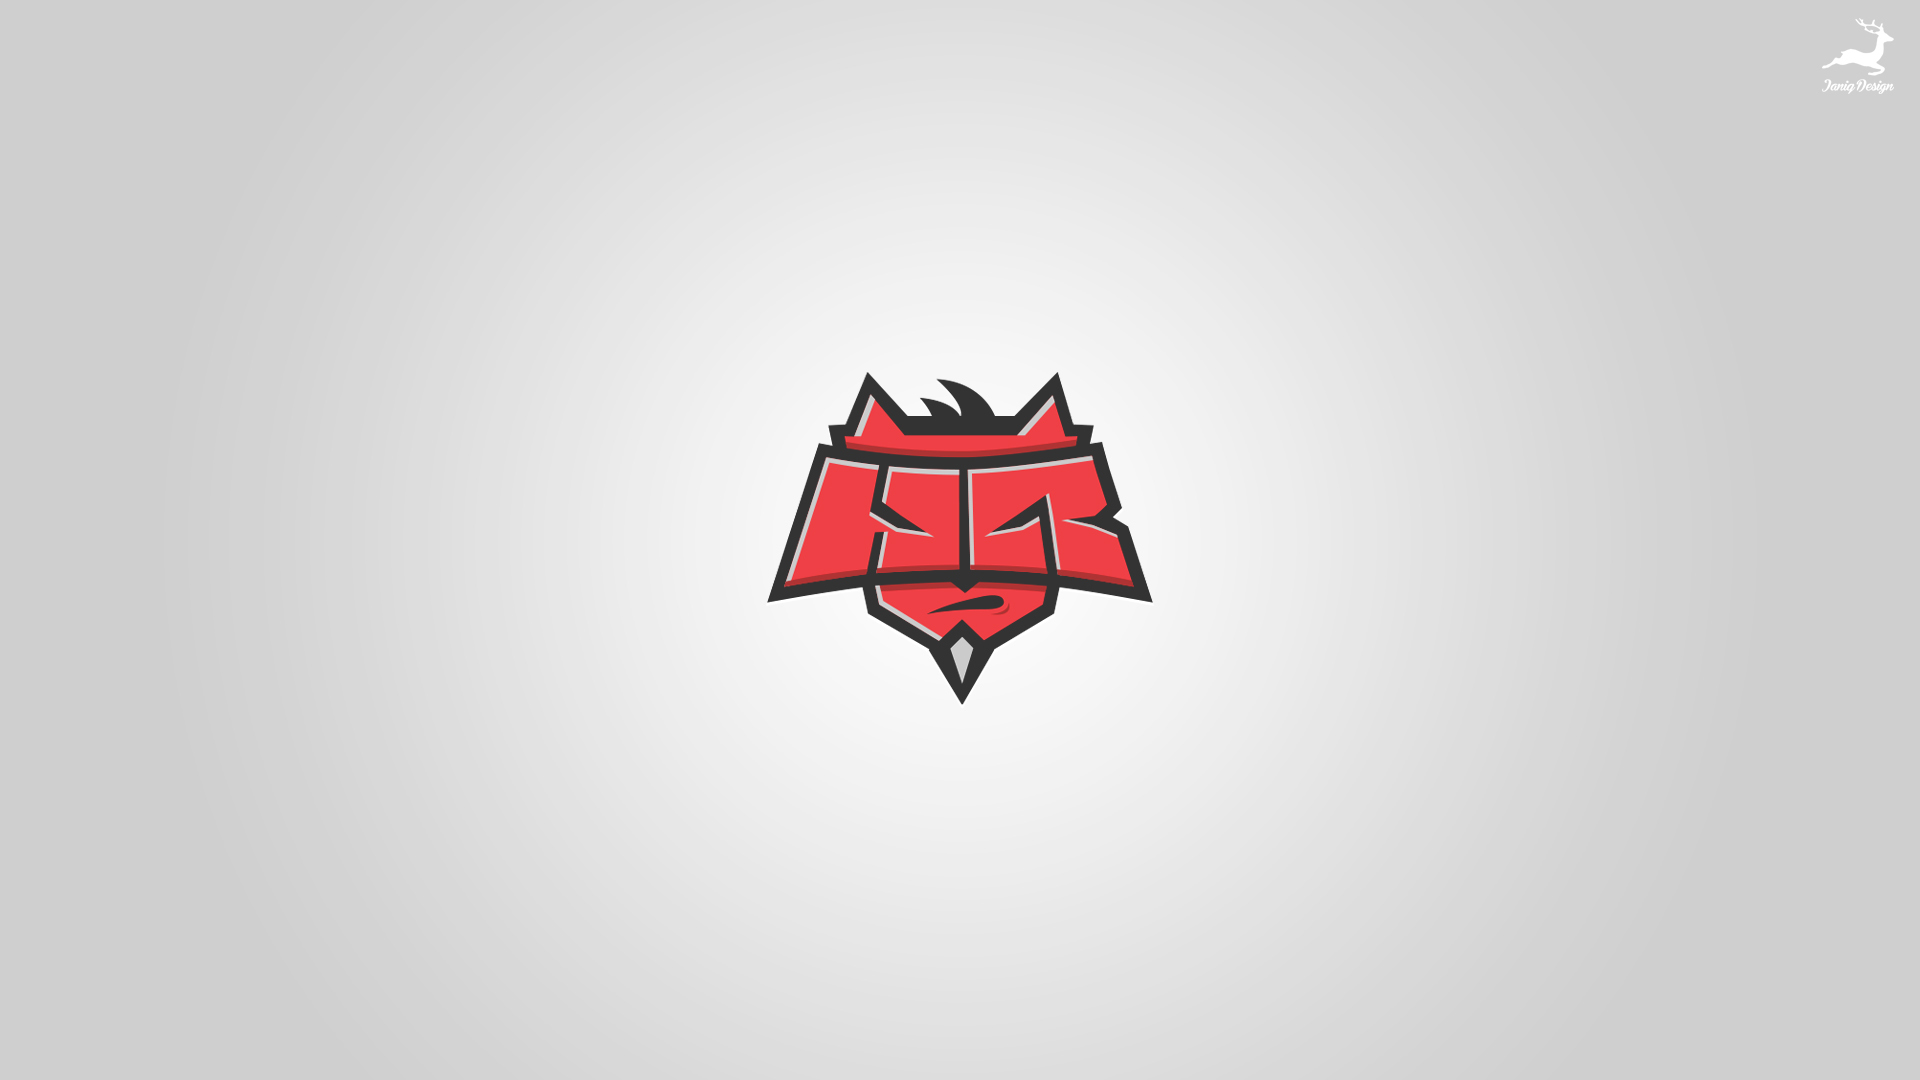 Showing Gallery For Hellraisers Cs Go Wallpaper